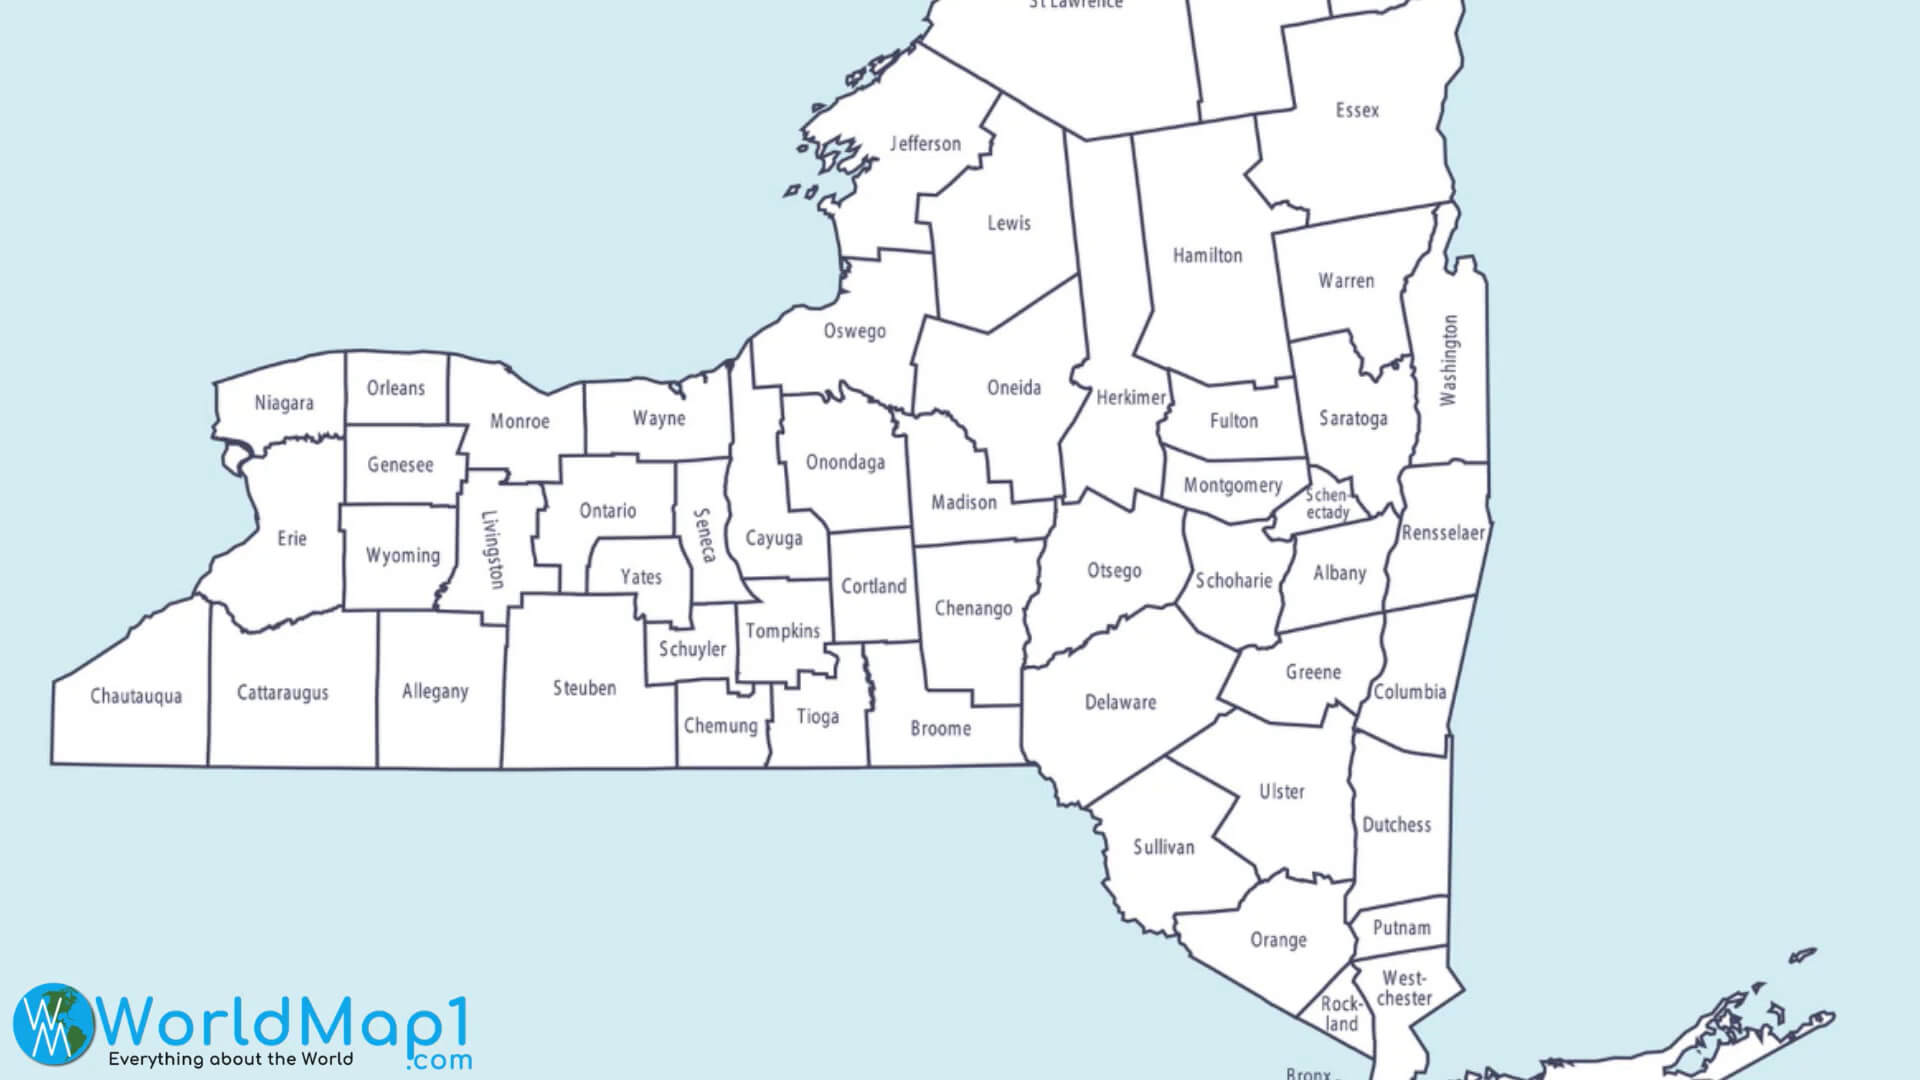 Outline Map of New York State